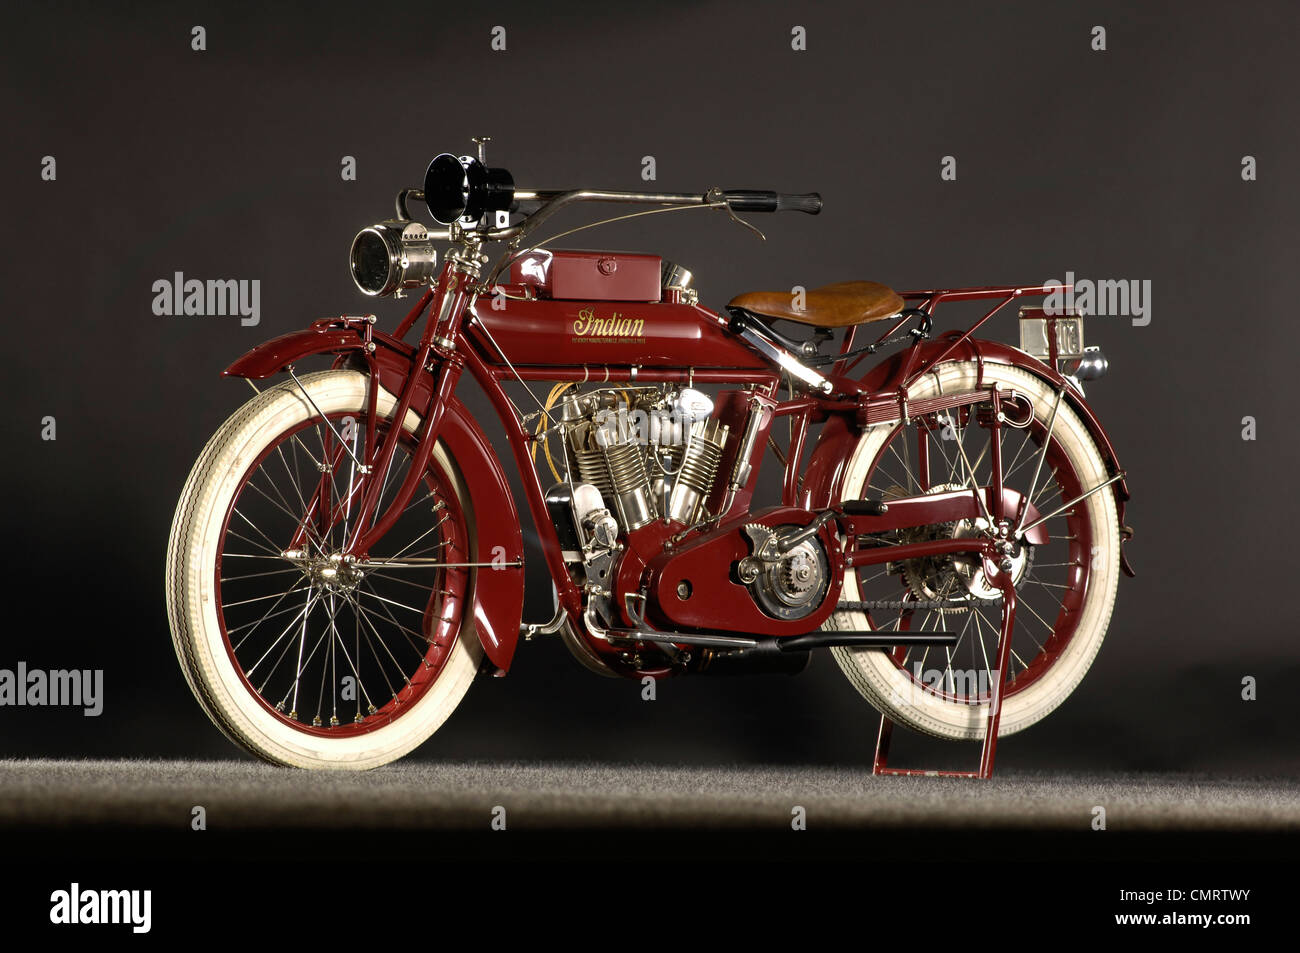 1915 Indian Big Twin motorcycle Banque D'Images